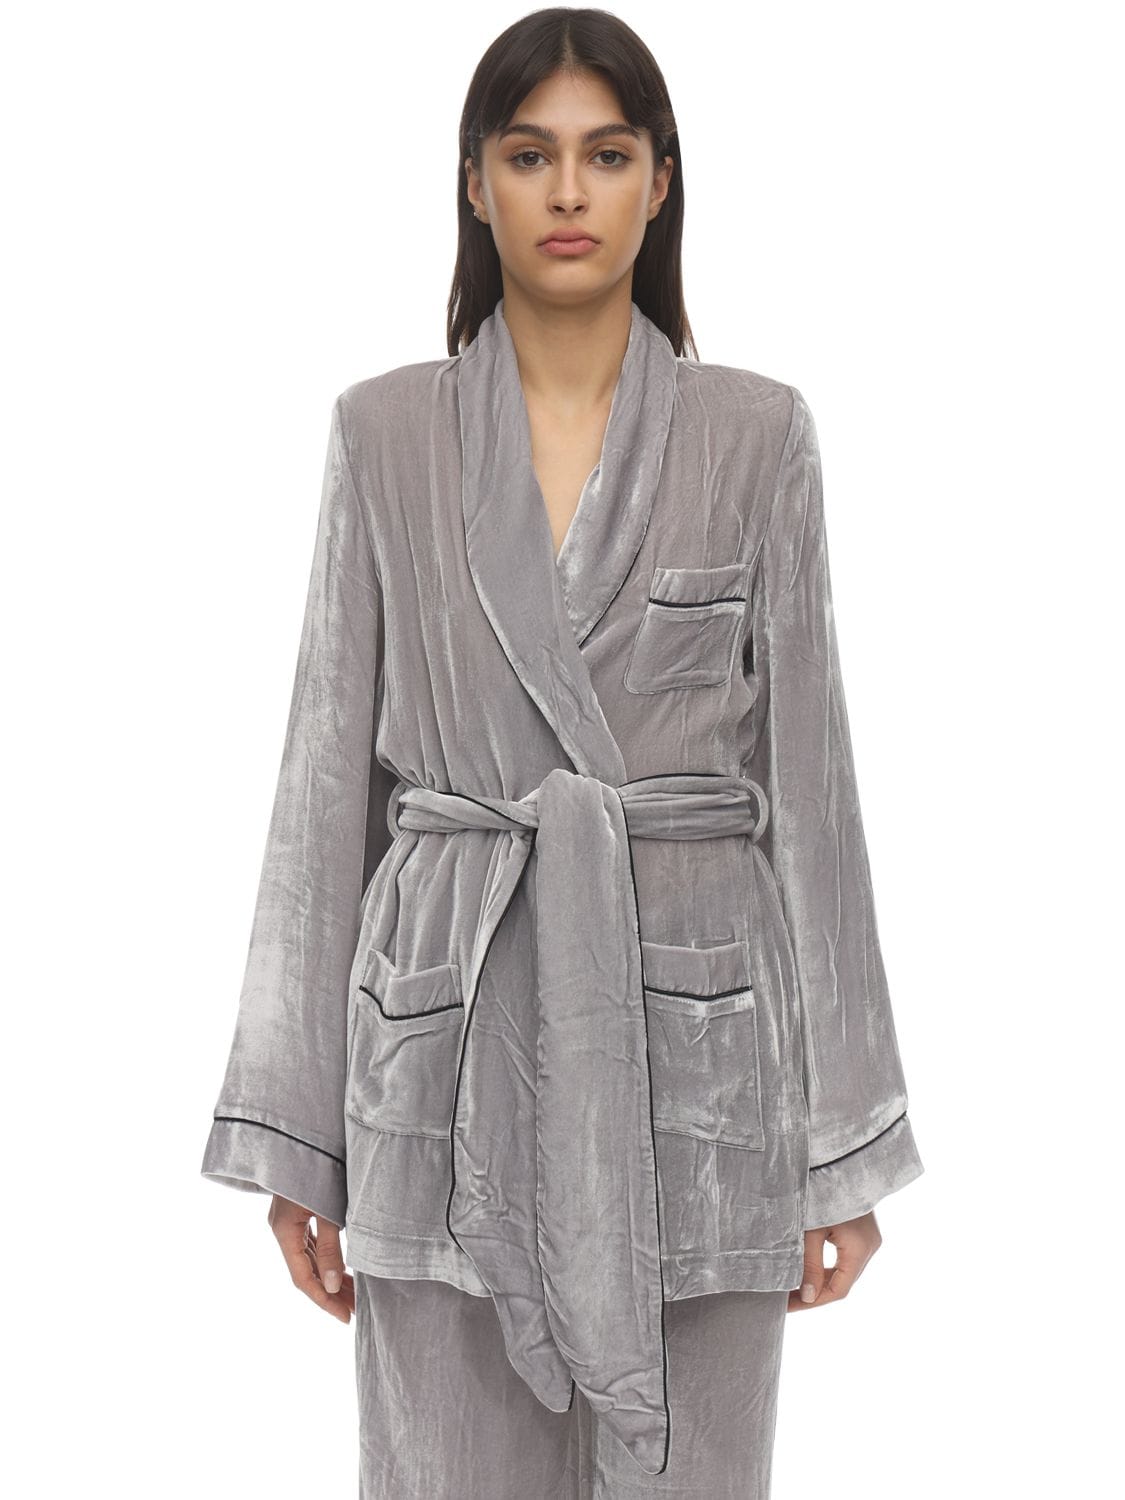 SLEEPING WITH JACQUES THE BON VIVANT SILK VELVET dressing gown,71IDPF003-RE9WRQ2